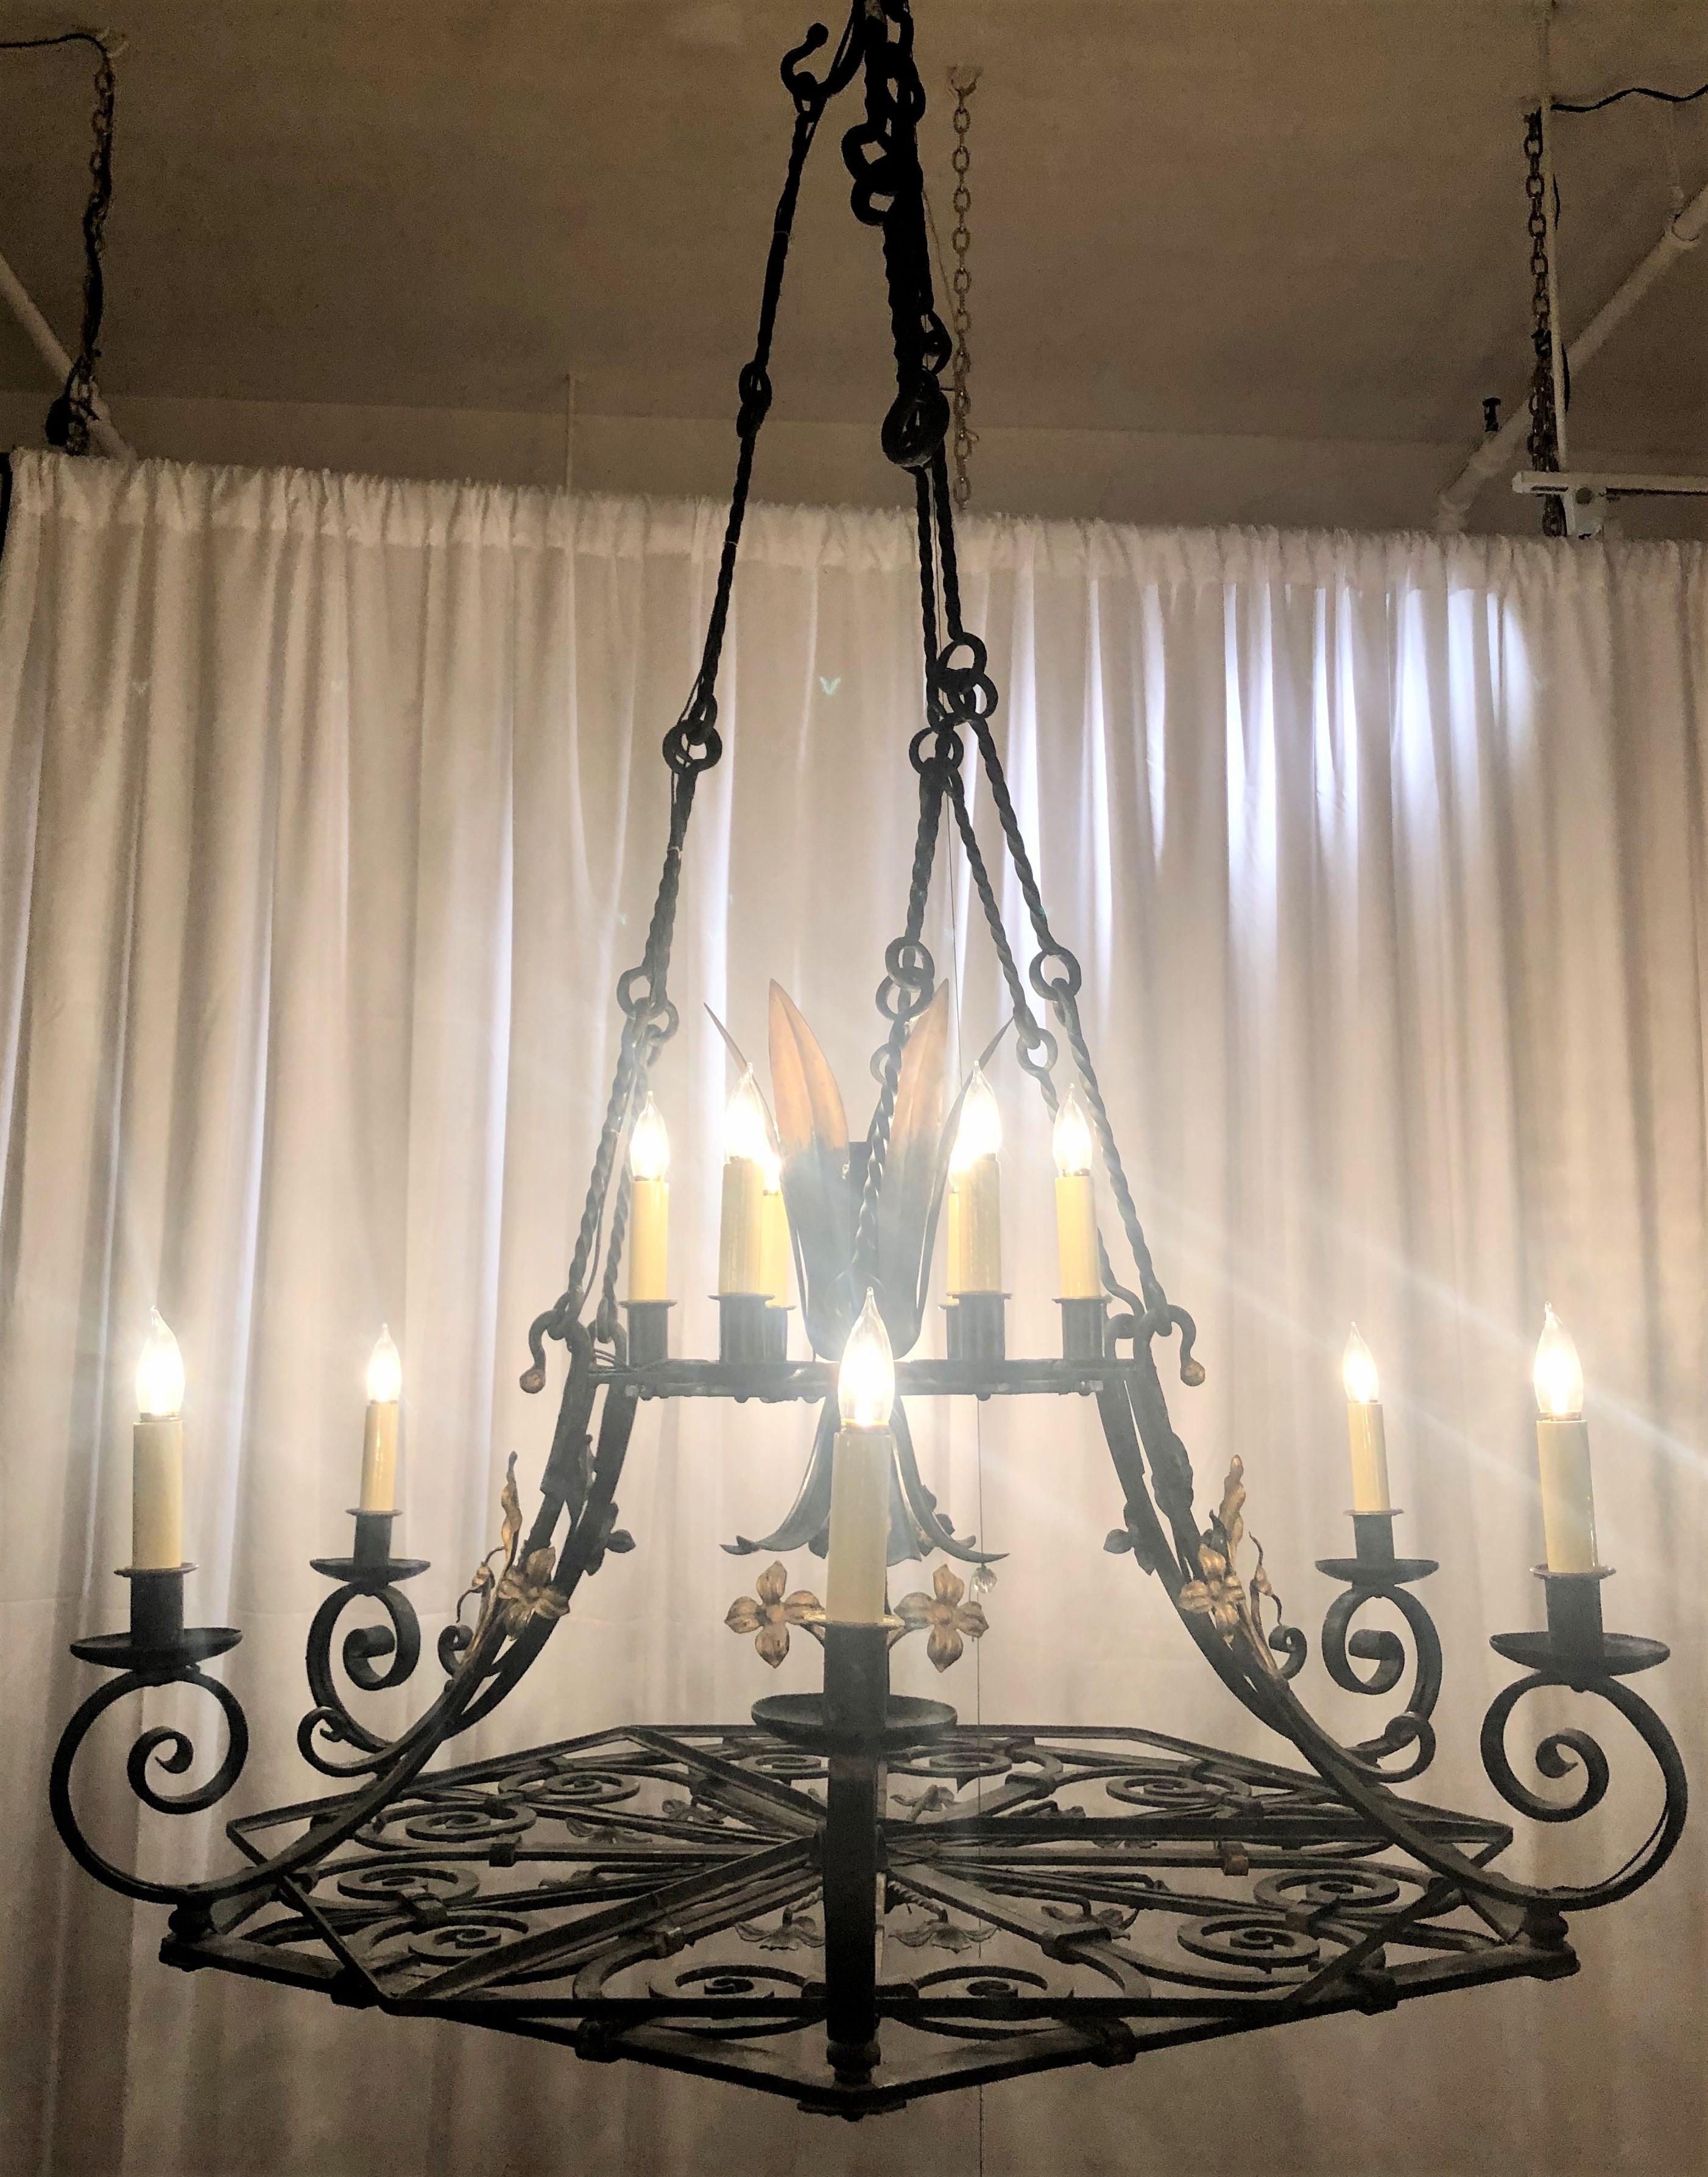 Grand size antique French wrought iron chateau chandelier, circa 1840.
      